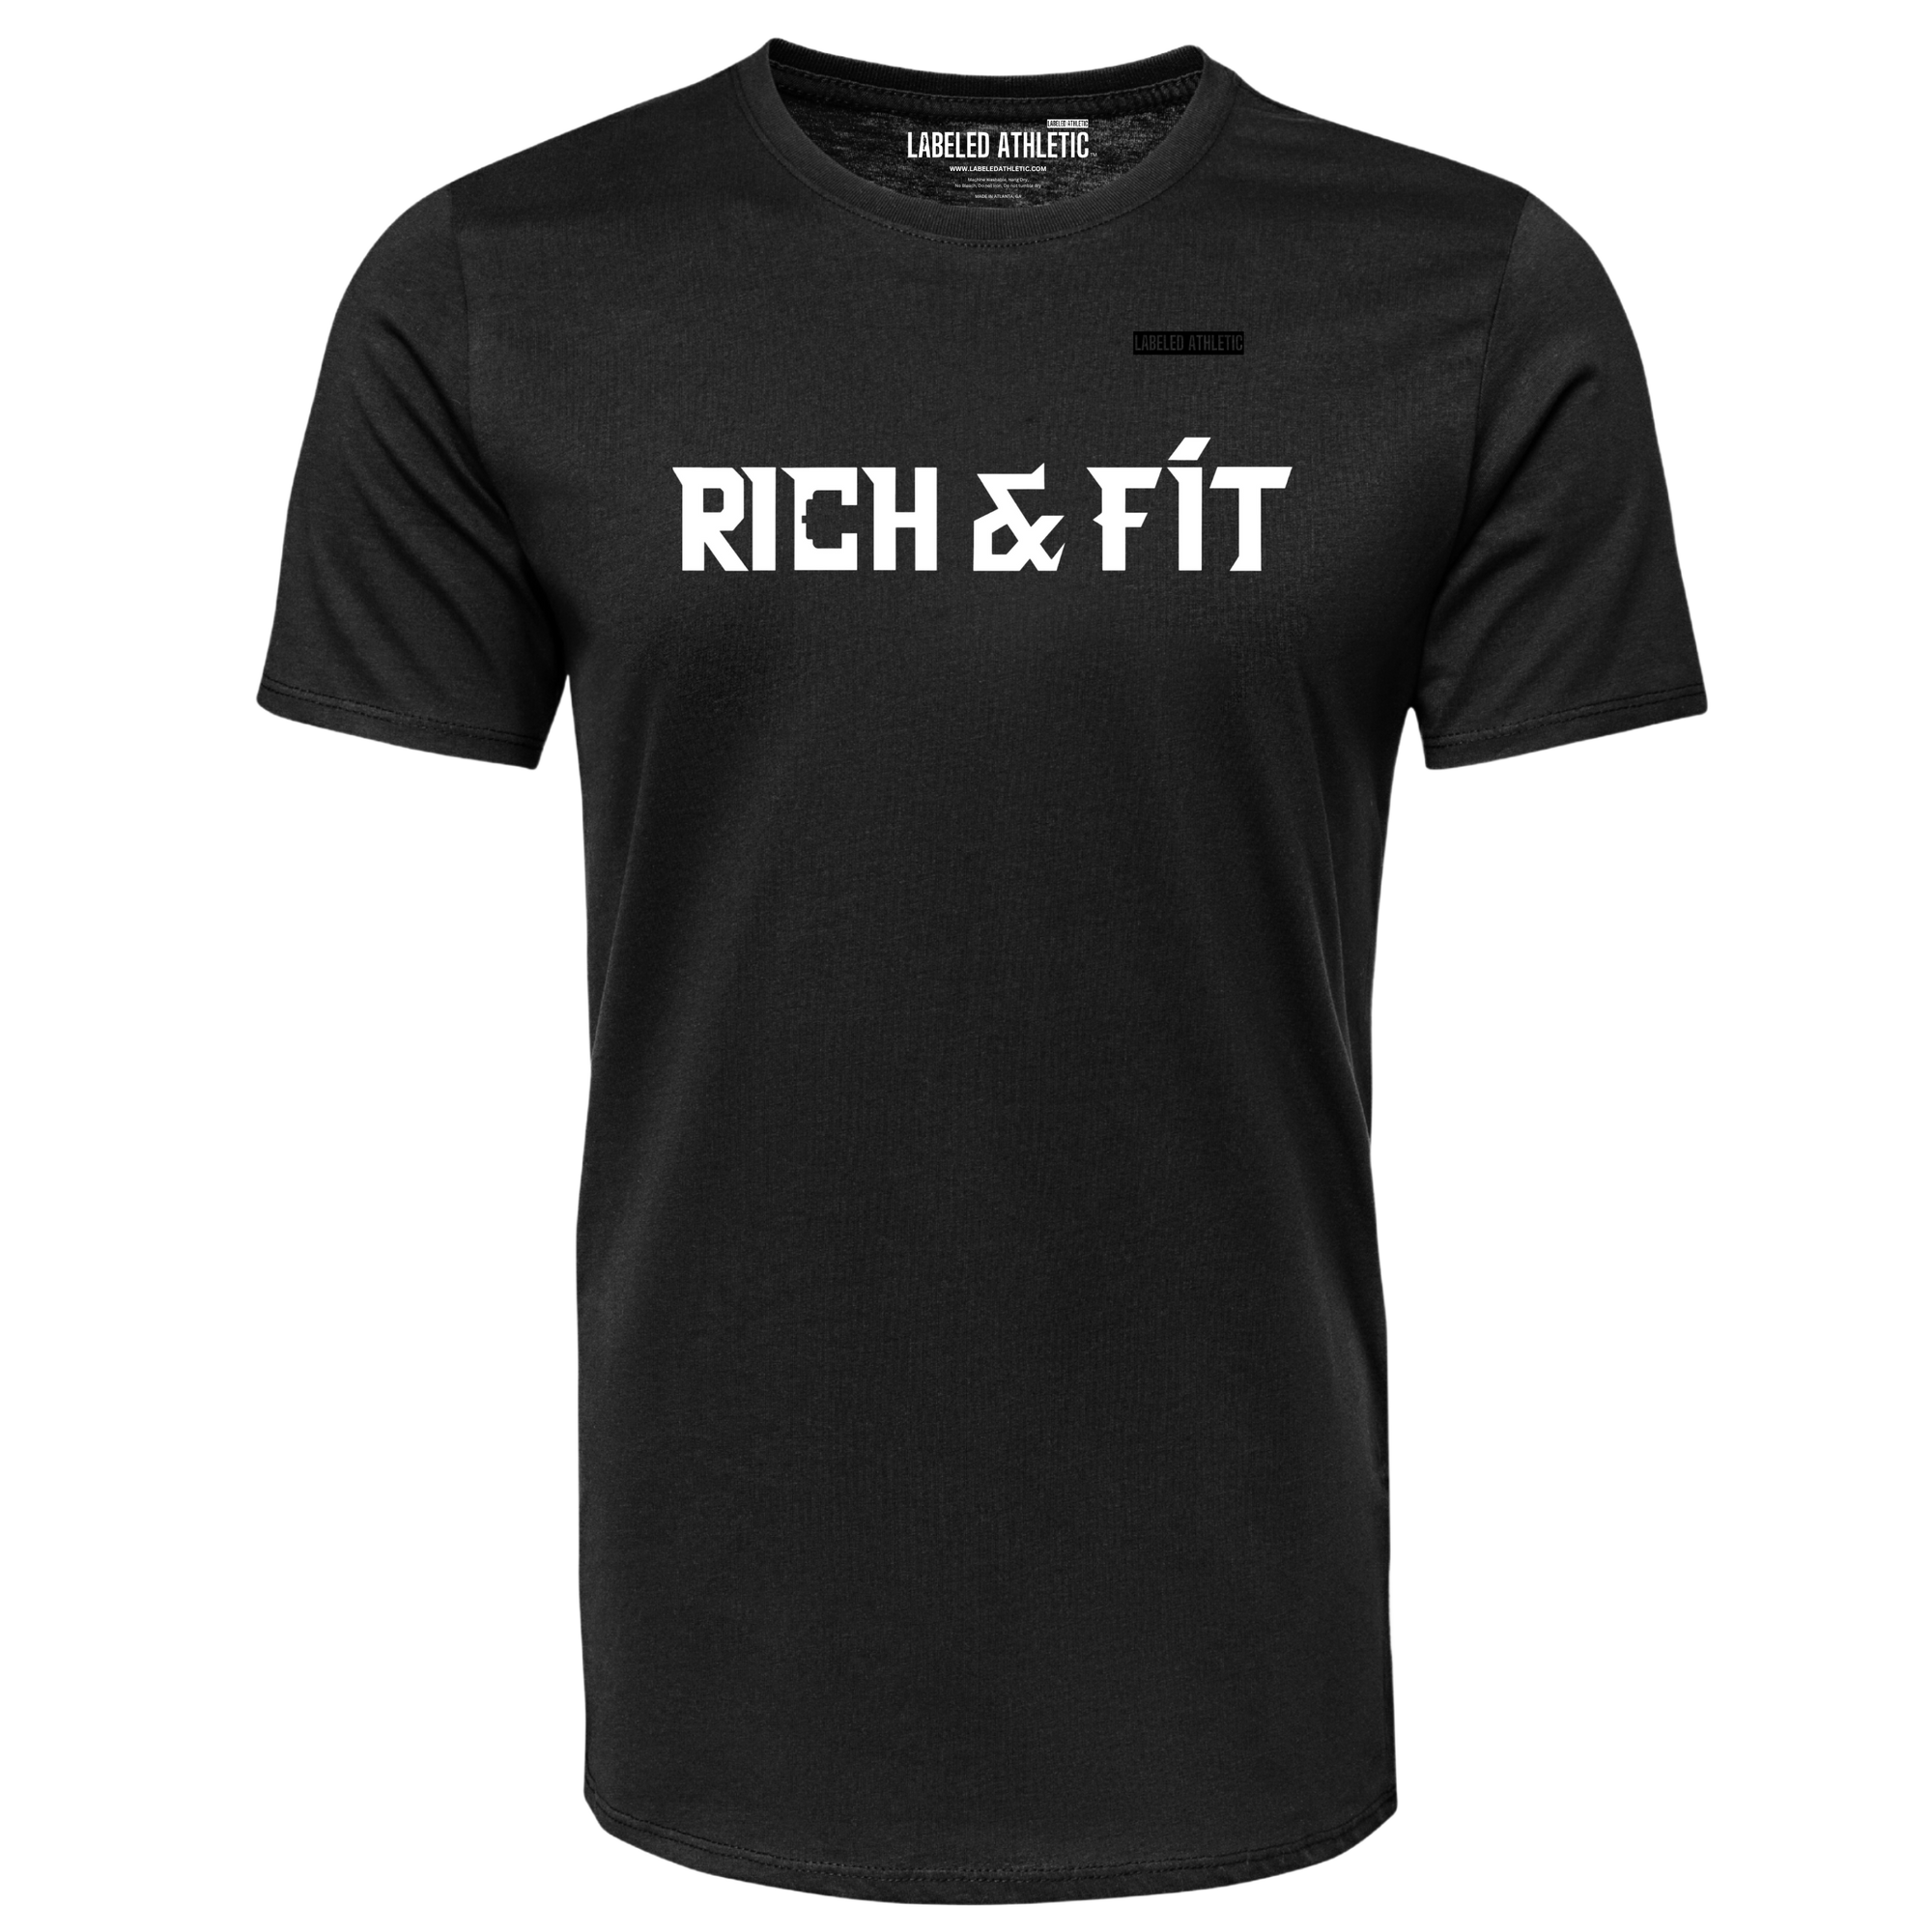 RICH & FIT - LABELED ATHLETIC T-SHIRT | BLACK/WHITE